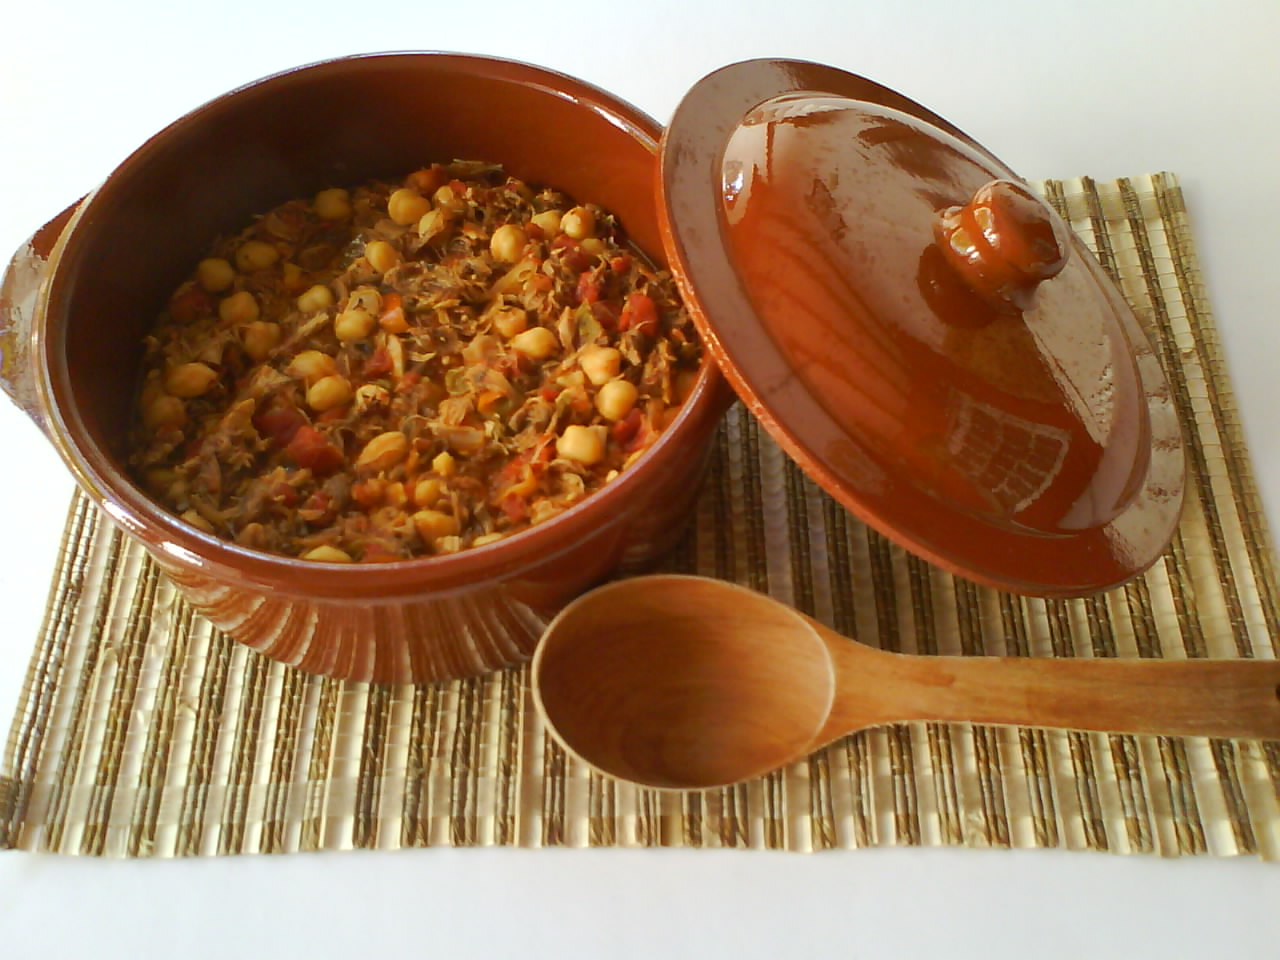 Casserole of old Canarian clothes